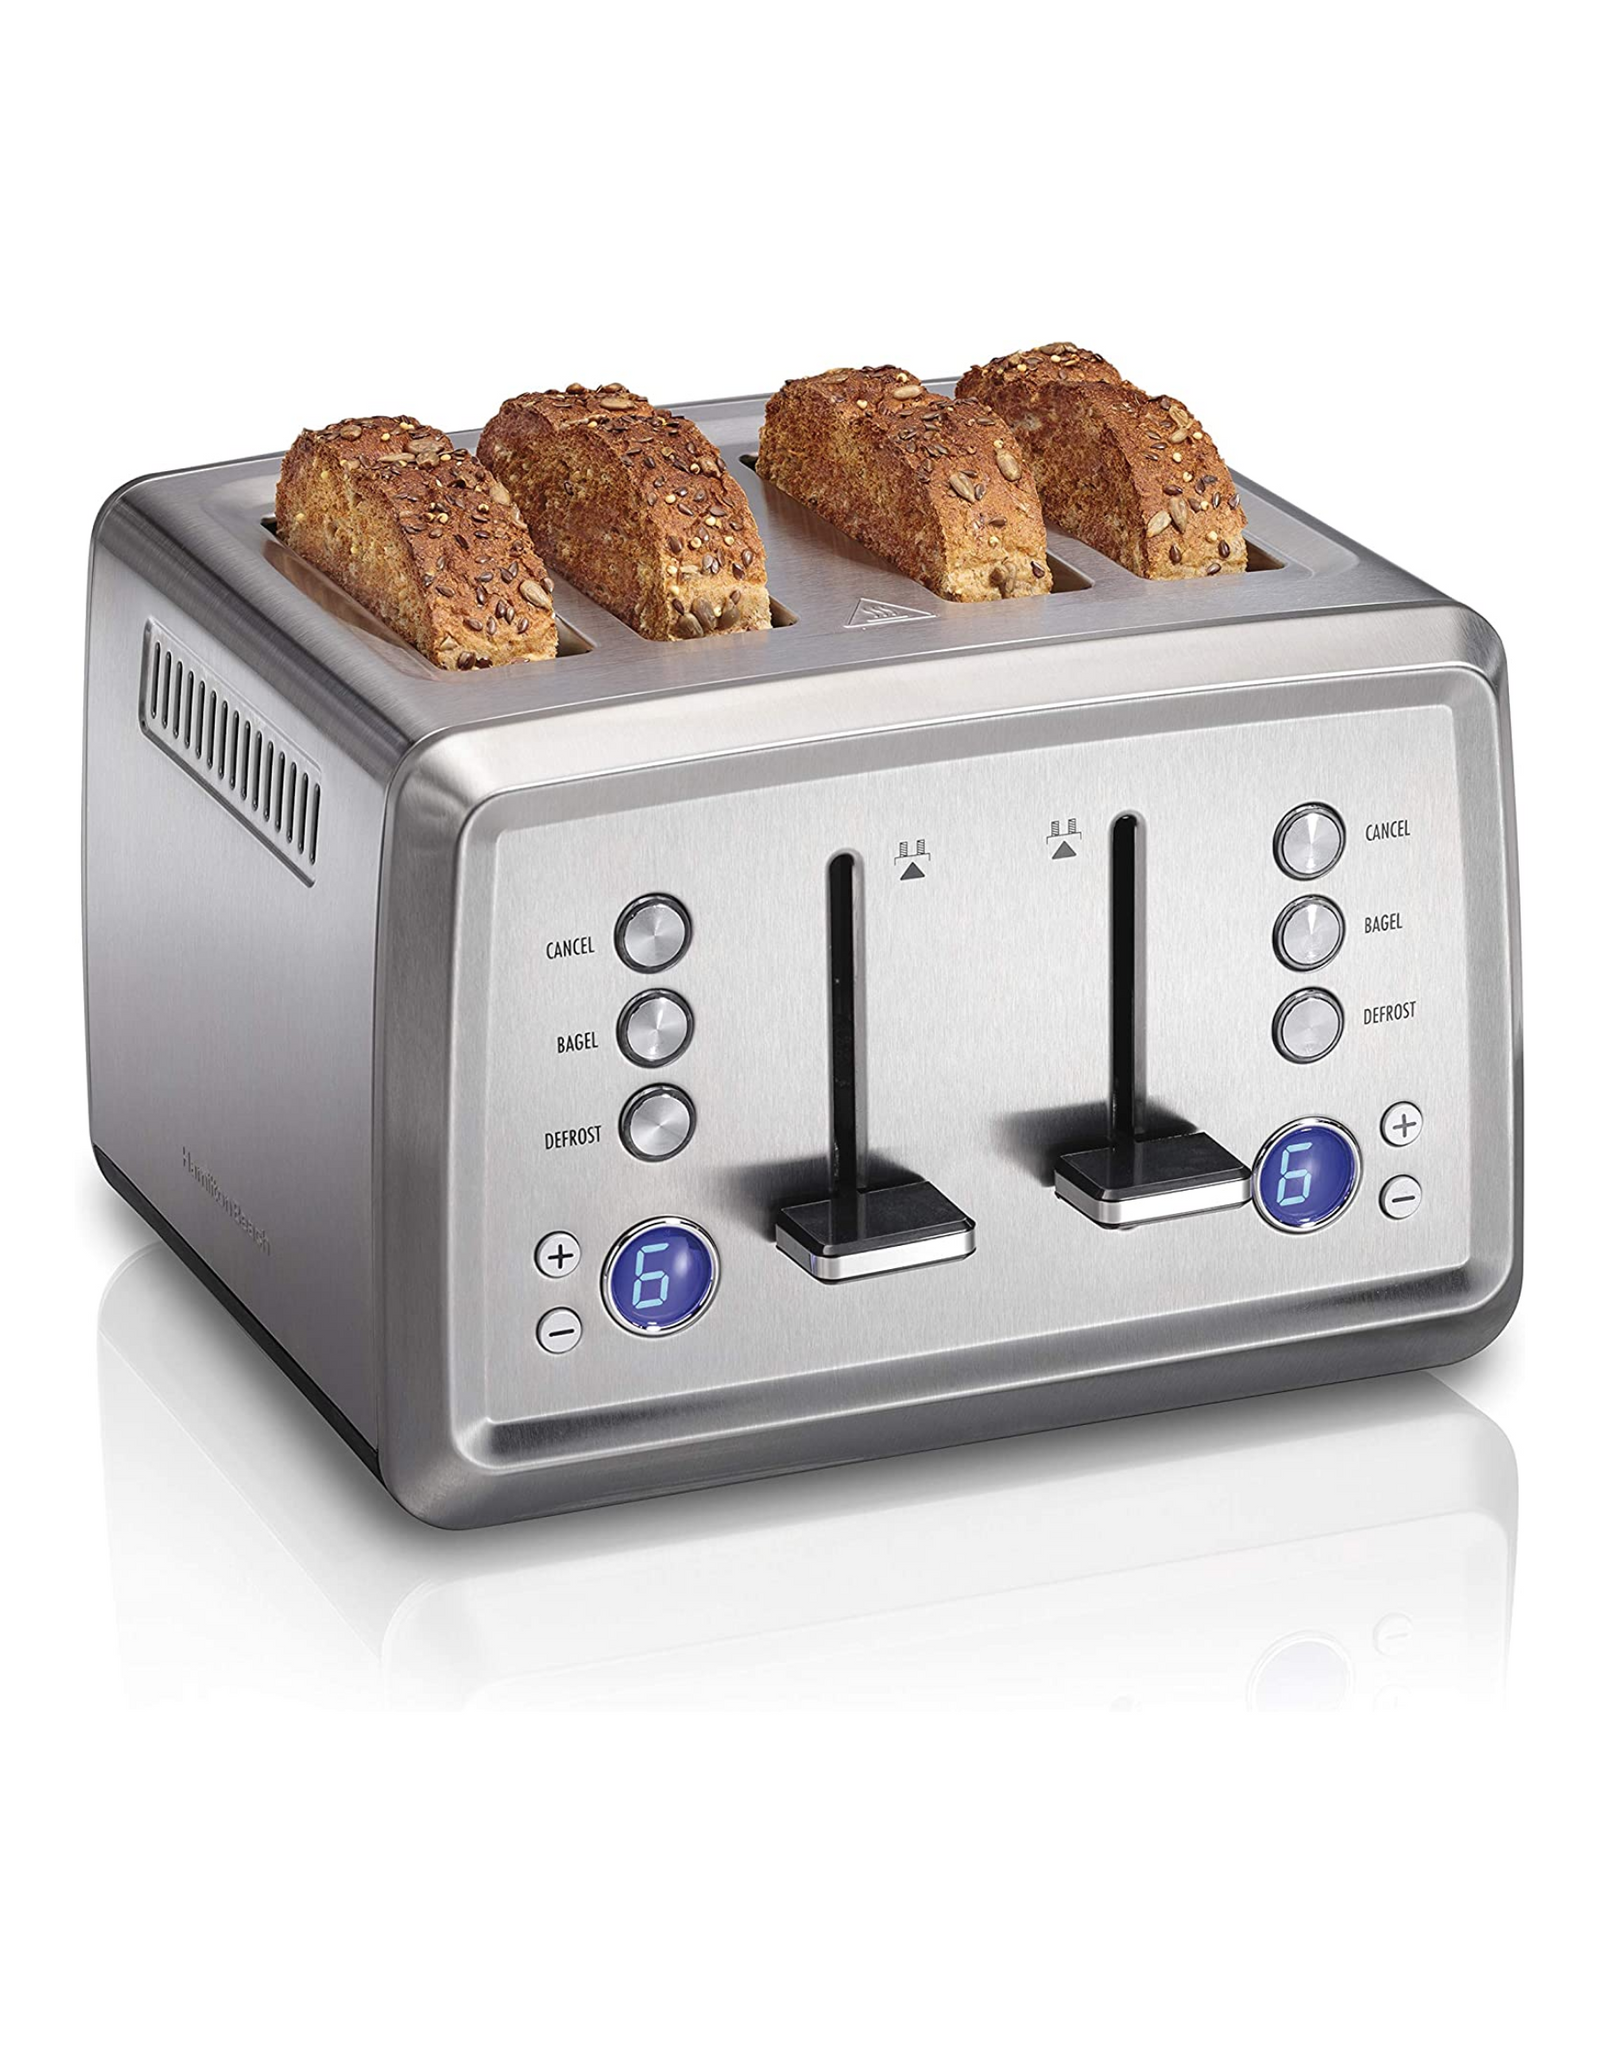 Hamilton Beach 24796 Toaster, with Bagel & Defrost Settings, 4 Slice Digital, Stainless Steel